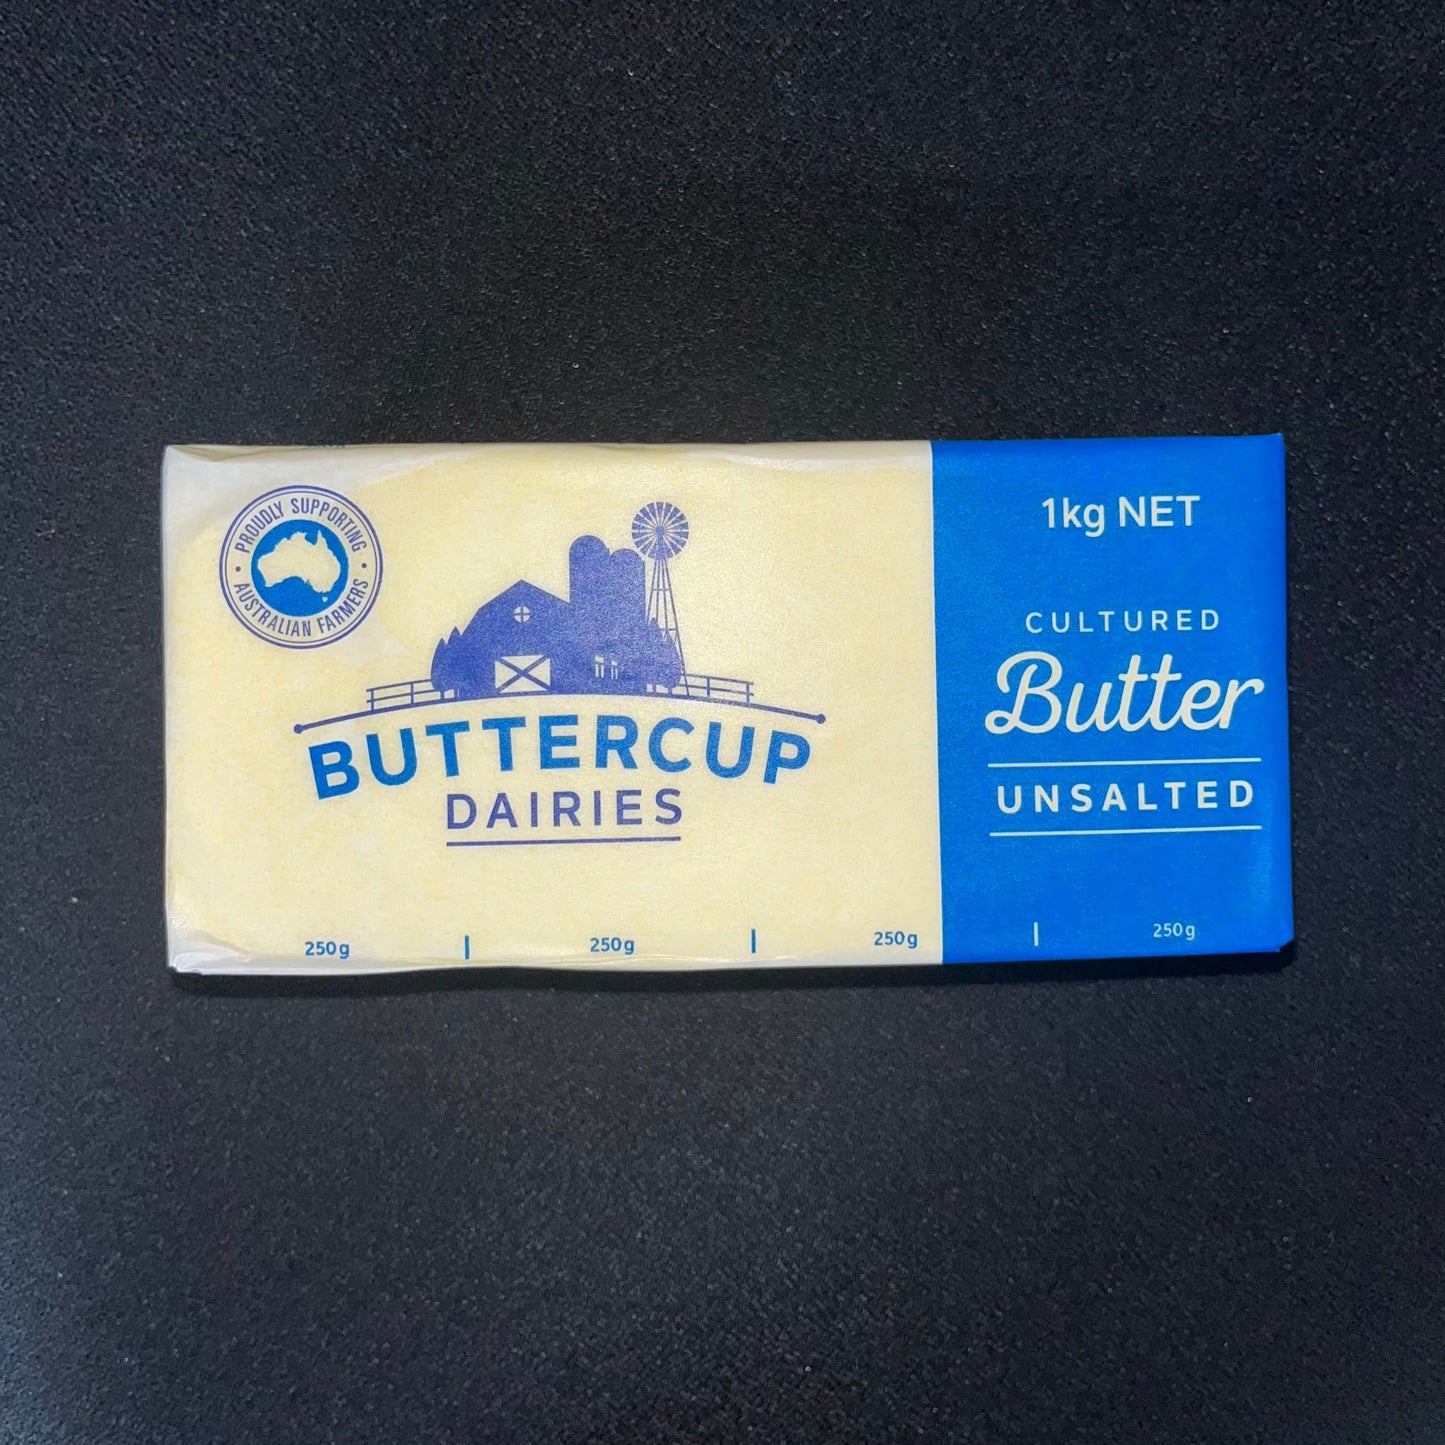 Norco ButterCup Butter Unsalted 1kg